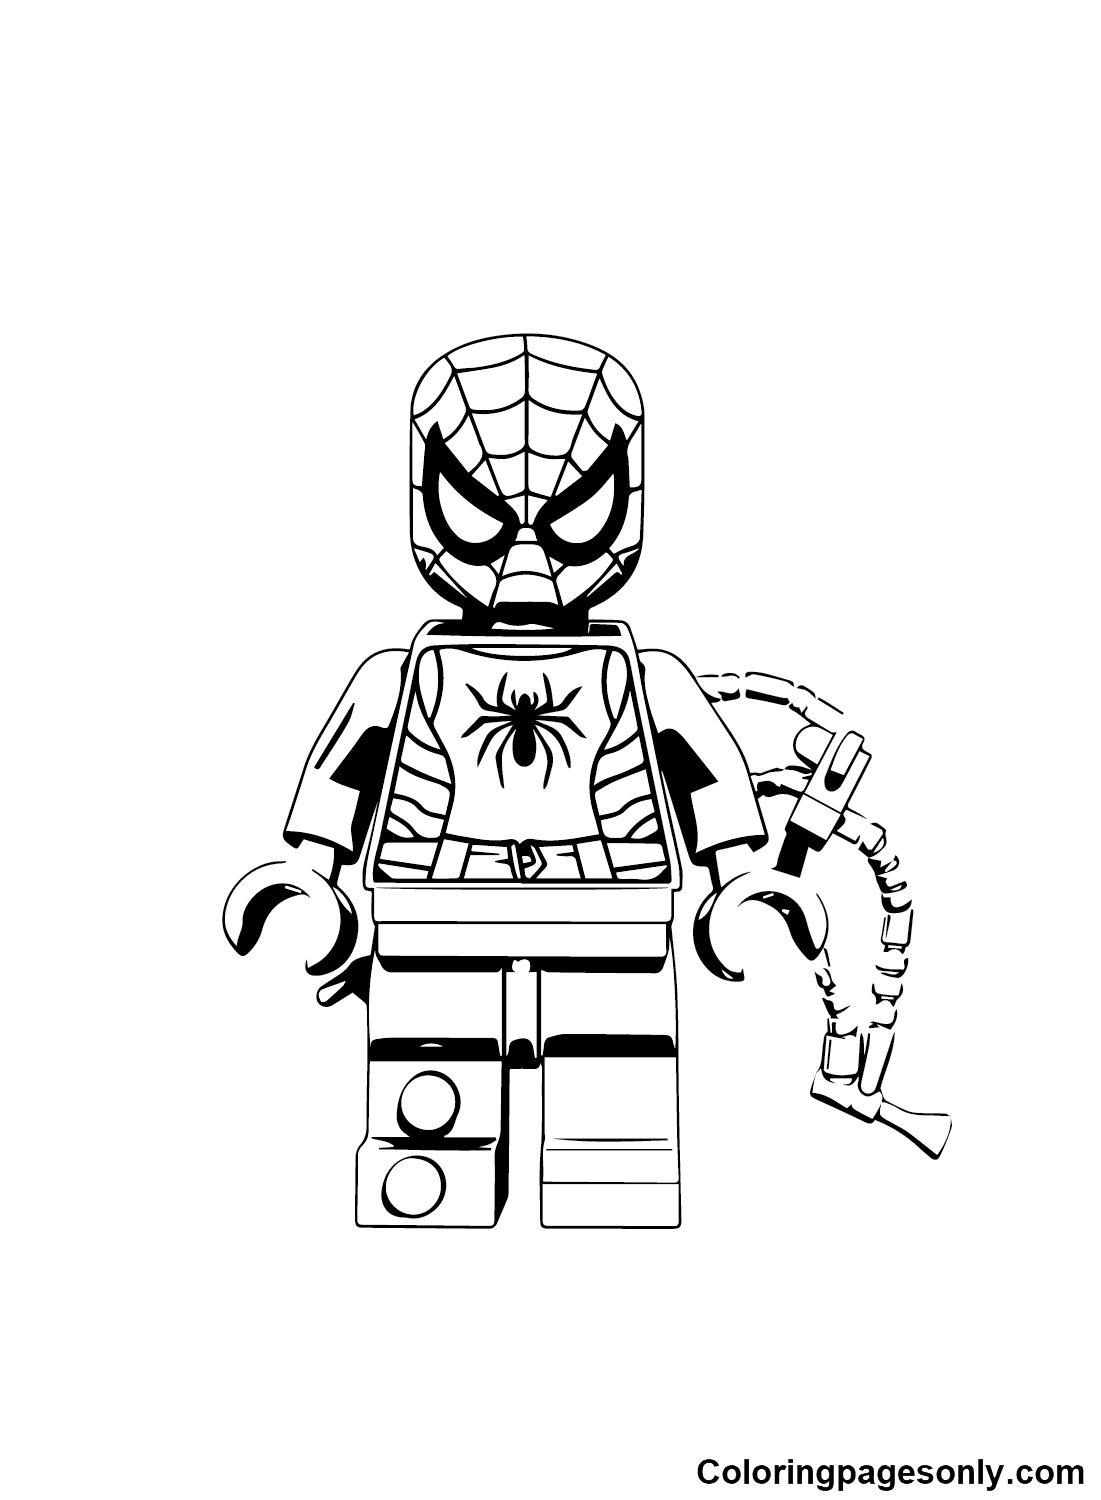 Lego Marvel Spiderman Coloring Page